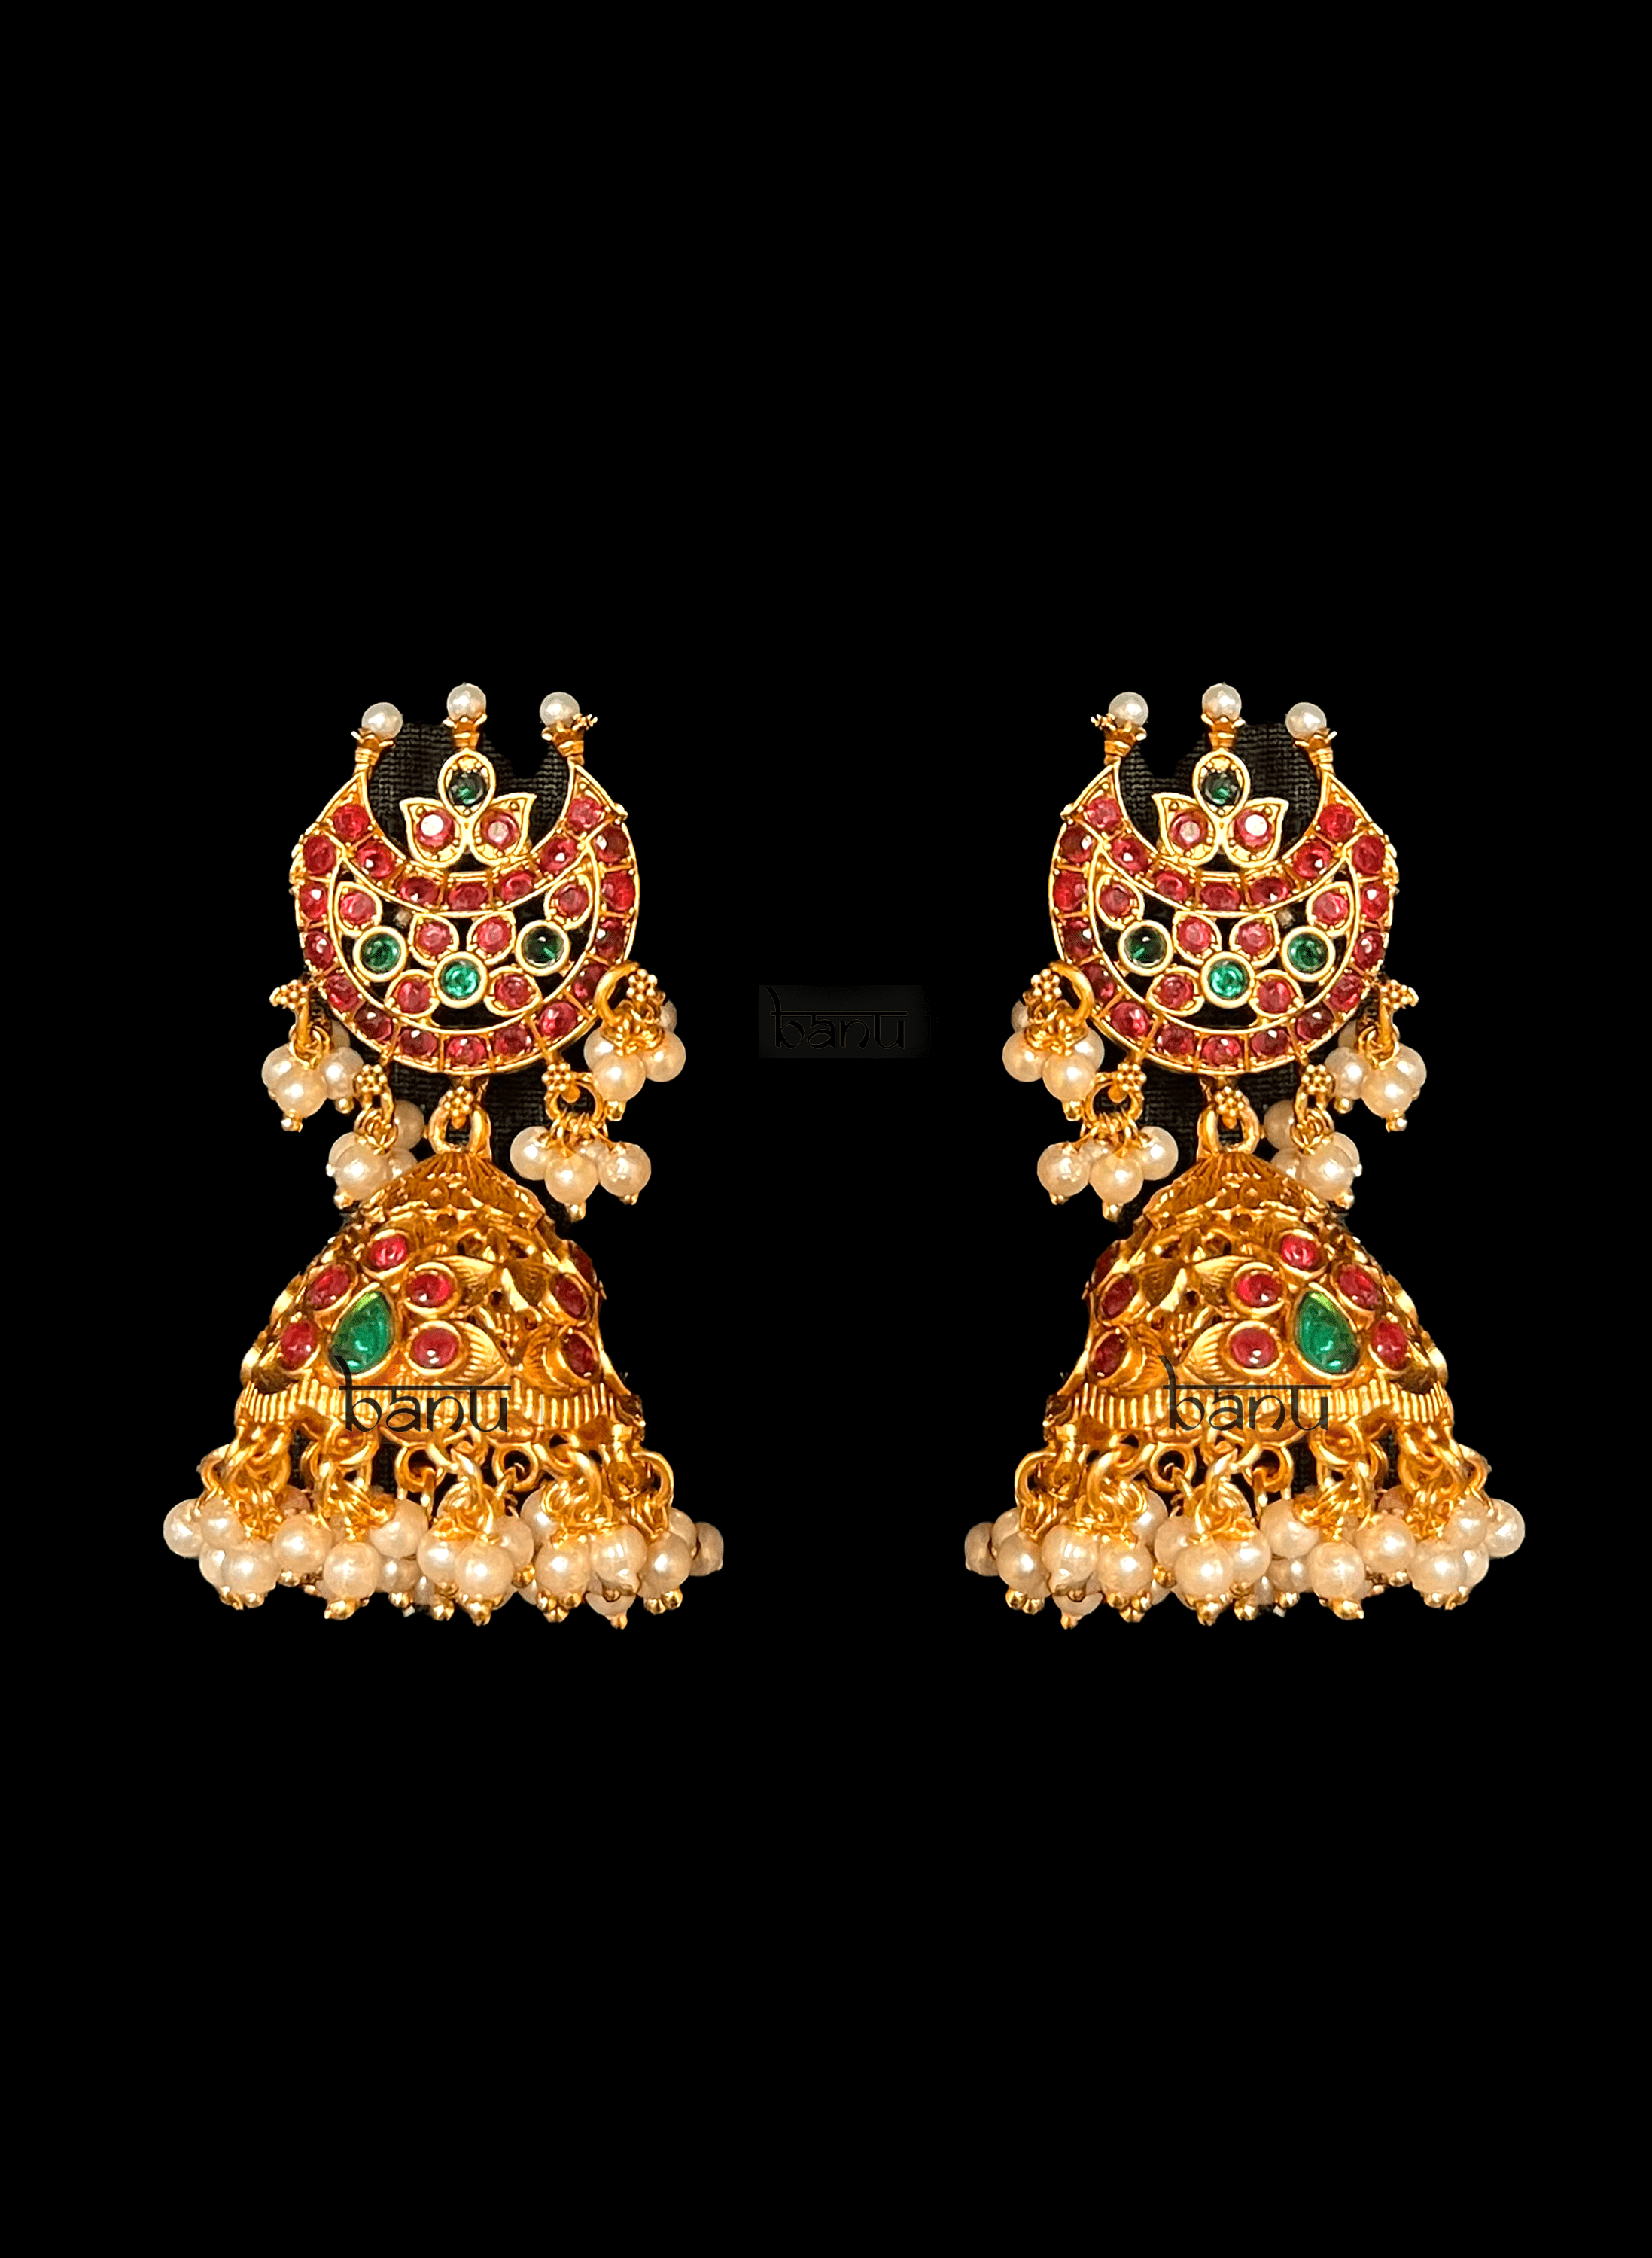 Balan - Traditional South Indian Temple Jewelry Set w/ Pearls, Ruby & Emeralds